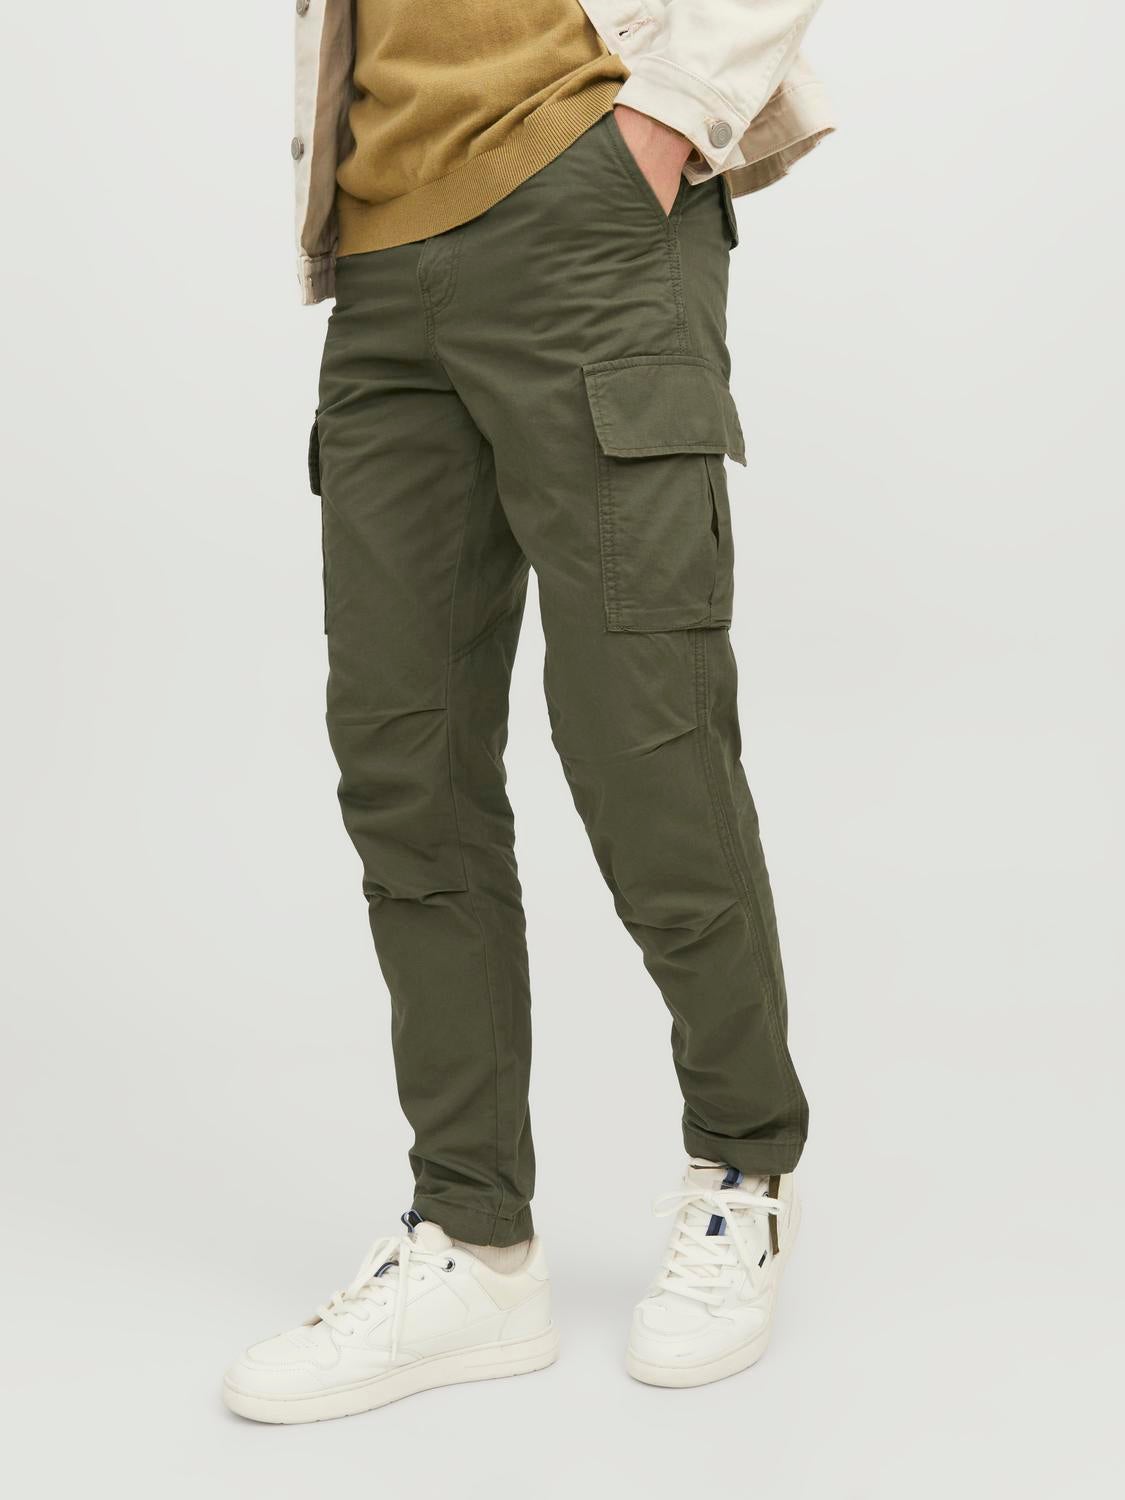 Buy Men Green Solid Carrot Fit Casual Trousers Online - 779628